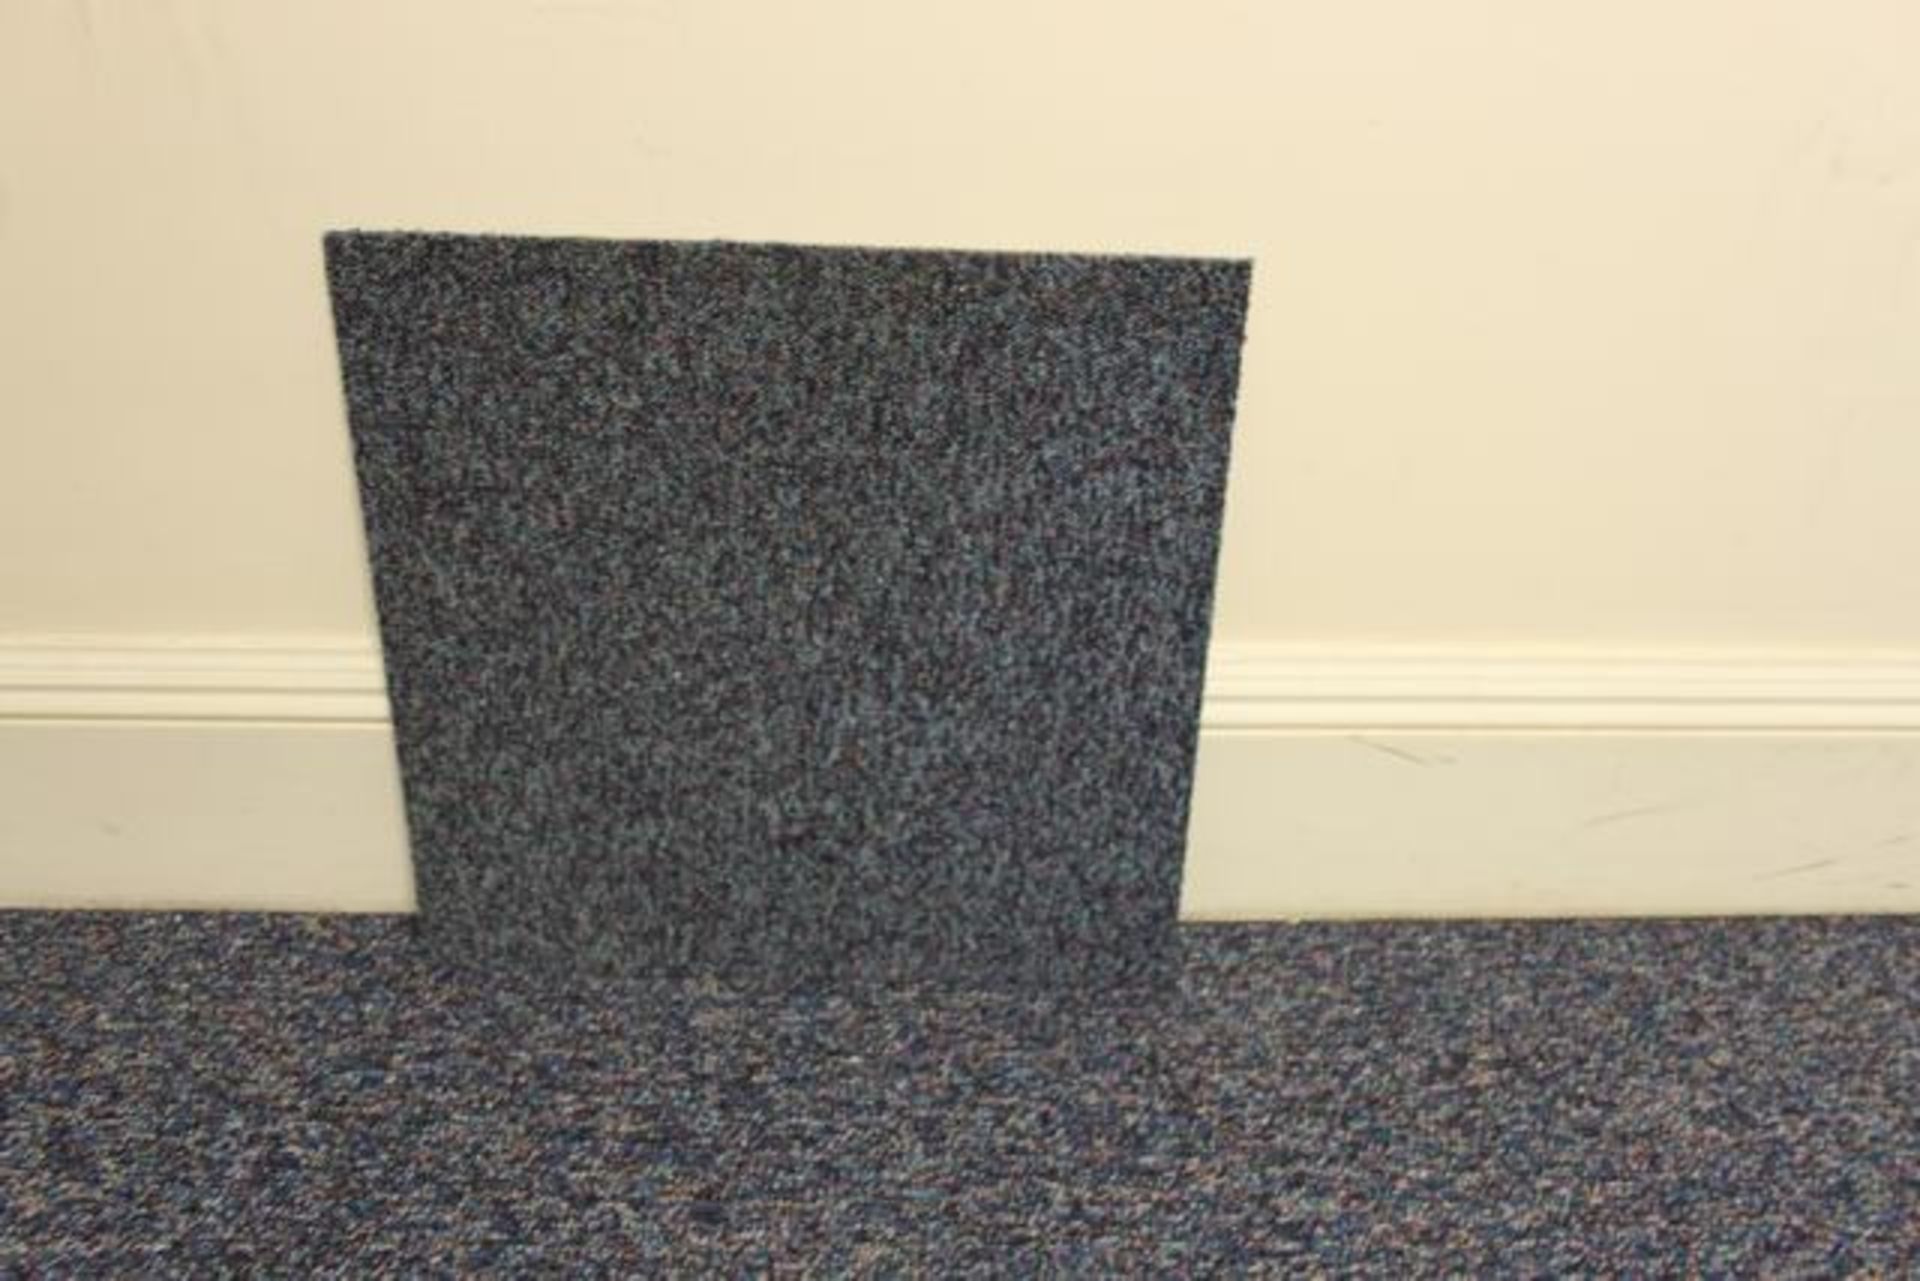 Approximately 250 x Burmatex looped pile dyed nylon carpet tile 50cm x 50cm >>Lift out charge  30